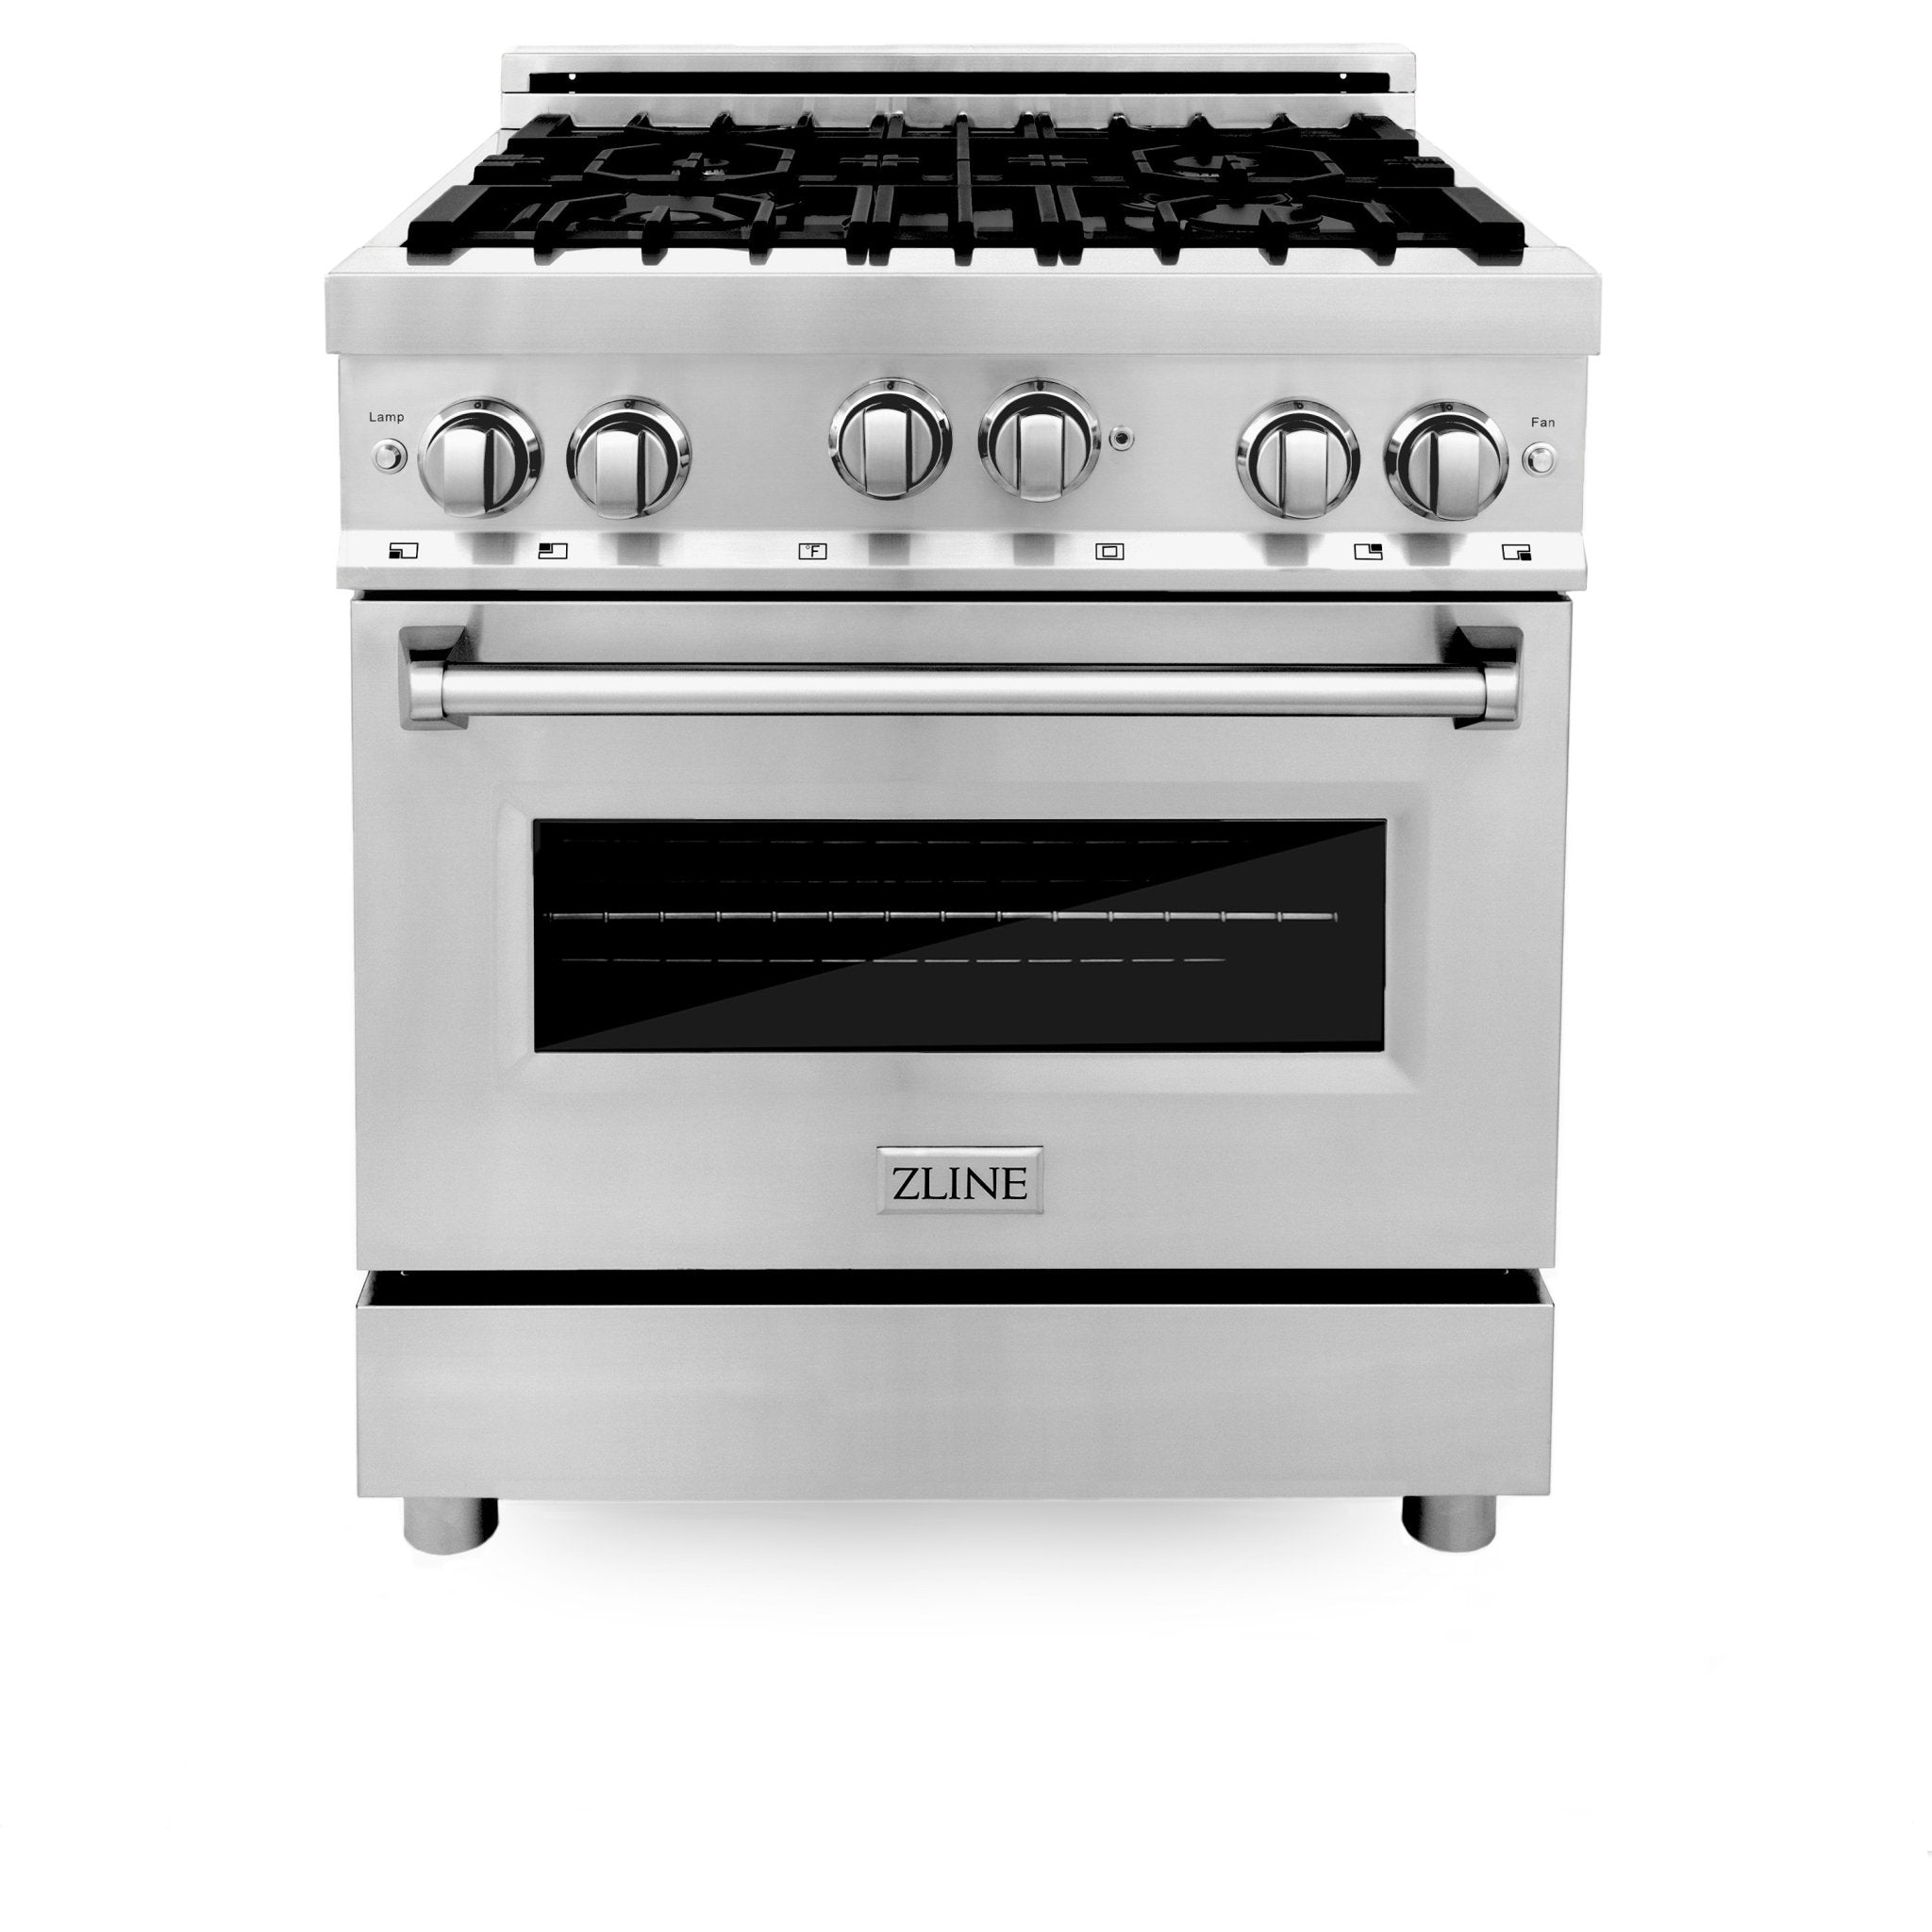 ZLINE Kitchen and Bath, ZLINE 30" Professional Gas on Gas Range in Stainless Steel with Color Door Options, RG30,